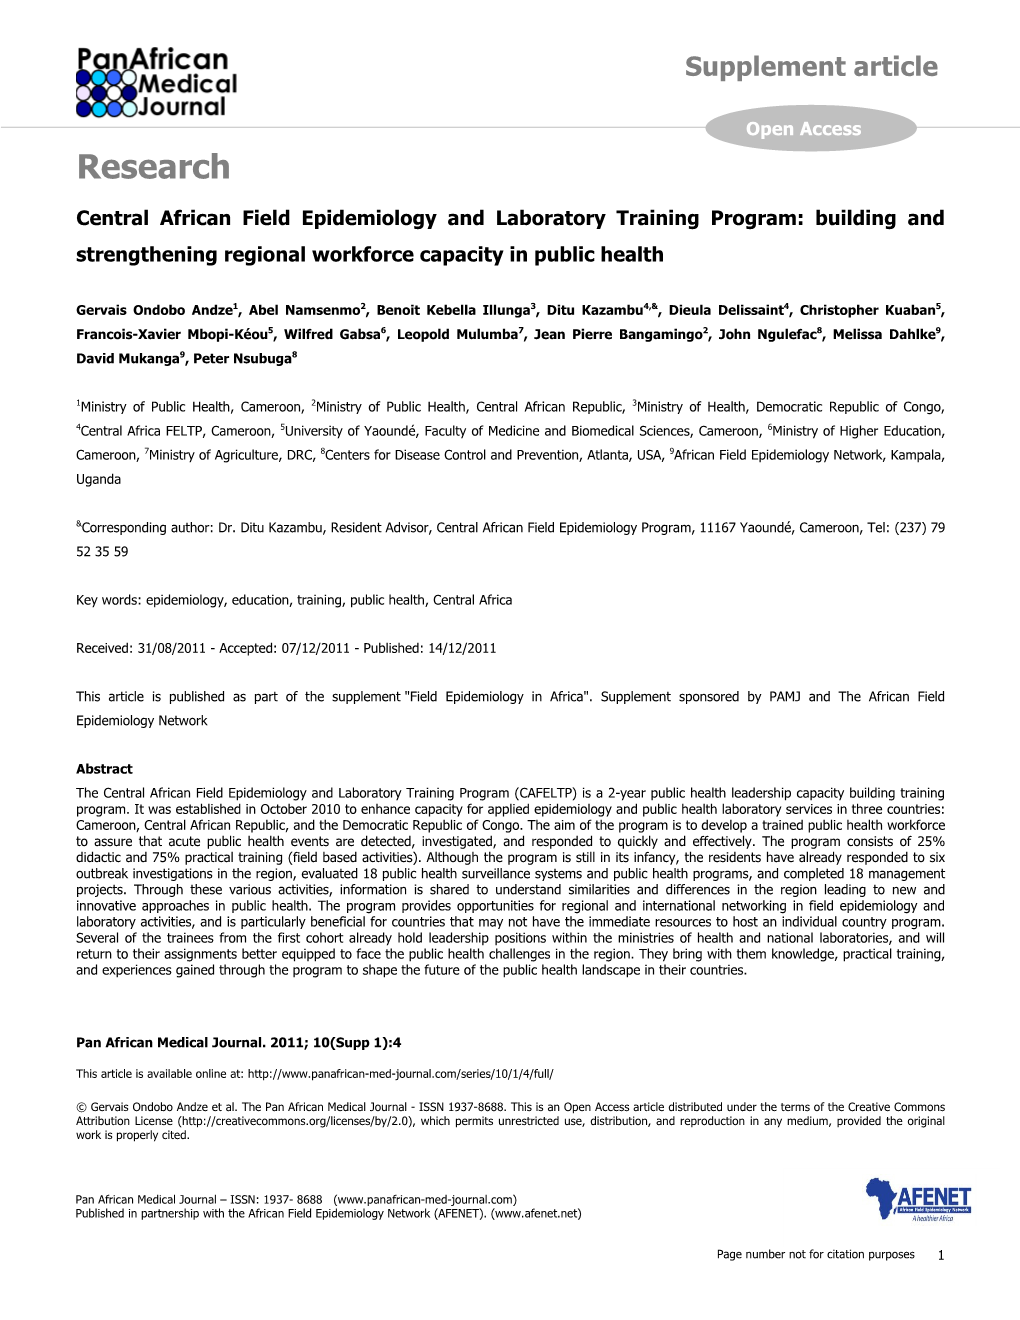 Research Central African Field Epidemiology and Laboratory Training Program: Building and Strengthening Regional Workforce Capacity in Public Health